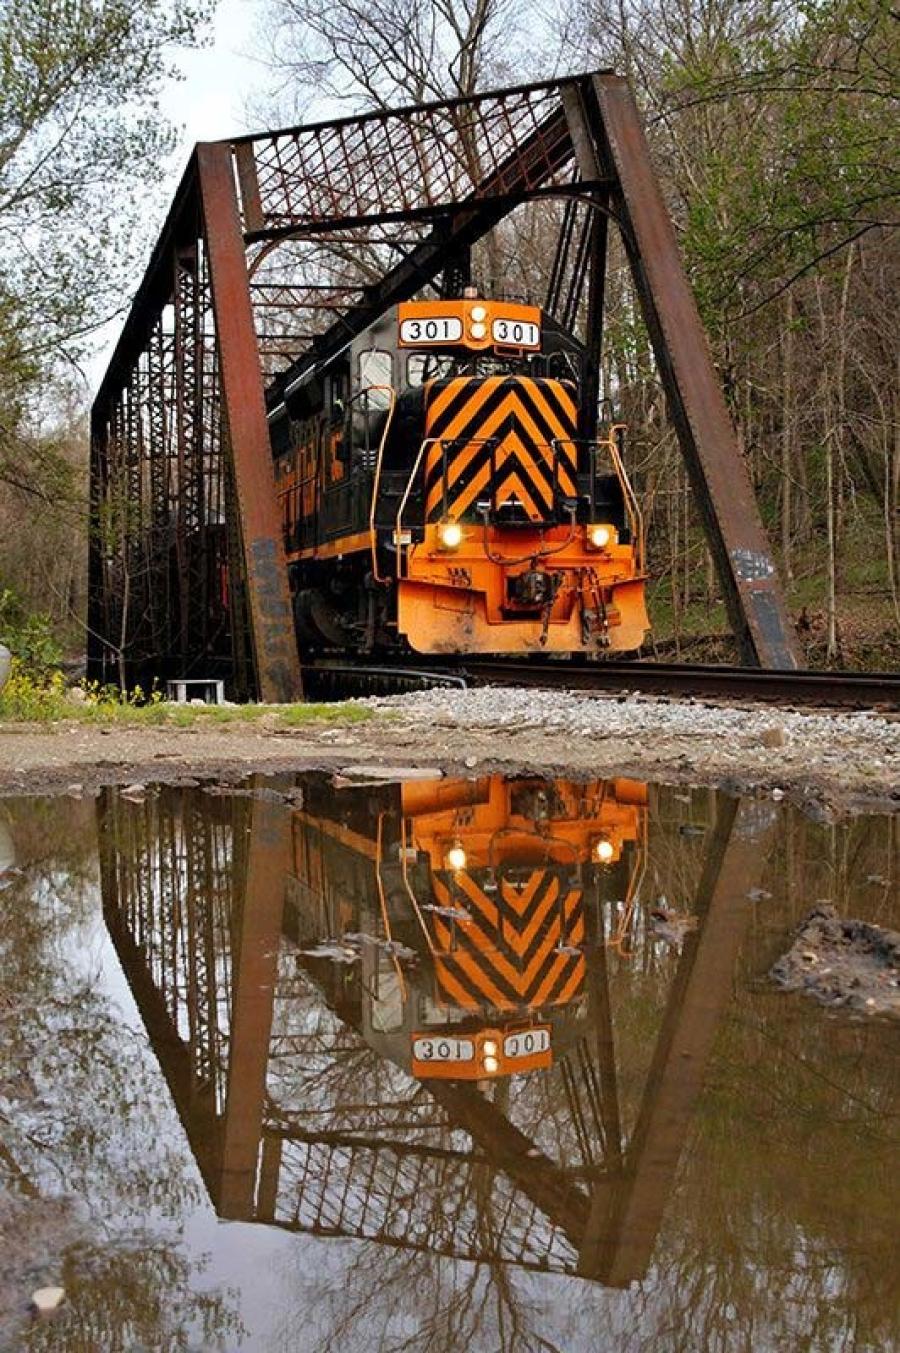 The ORDC approved a grant to WLE in the amount of $125,000 to improve the clearance of a railroad bridge over a state route in Tuscarawas County.